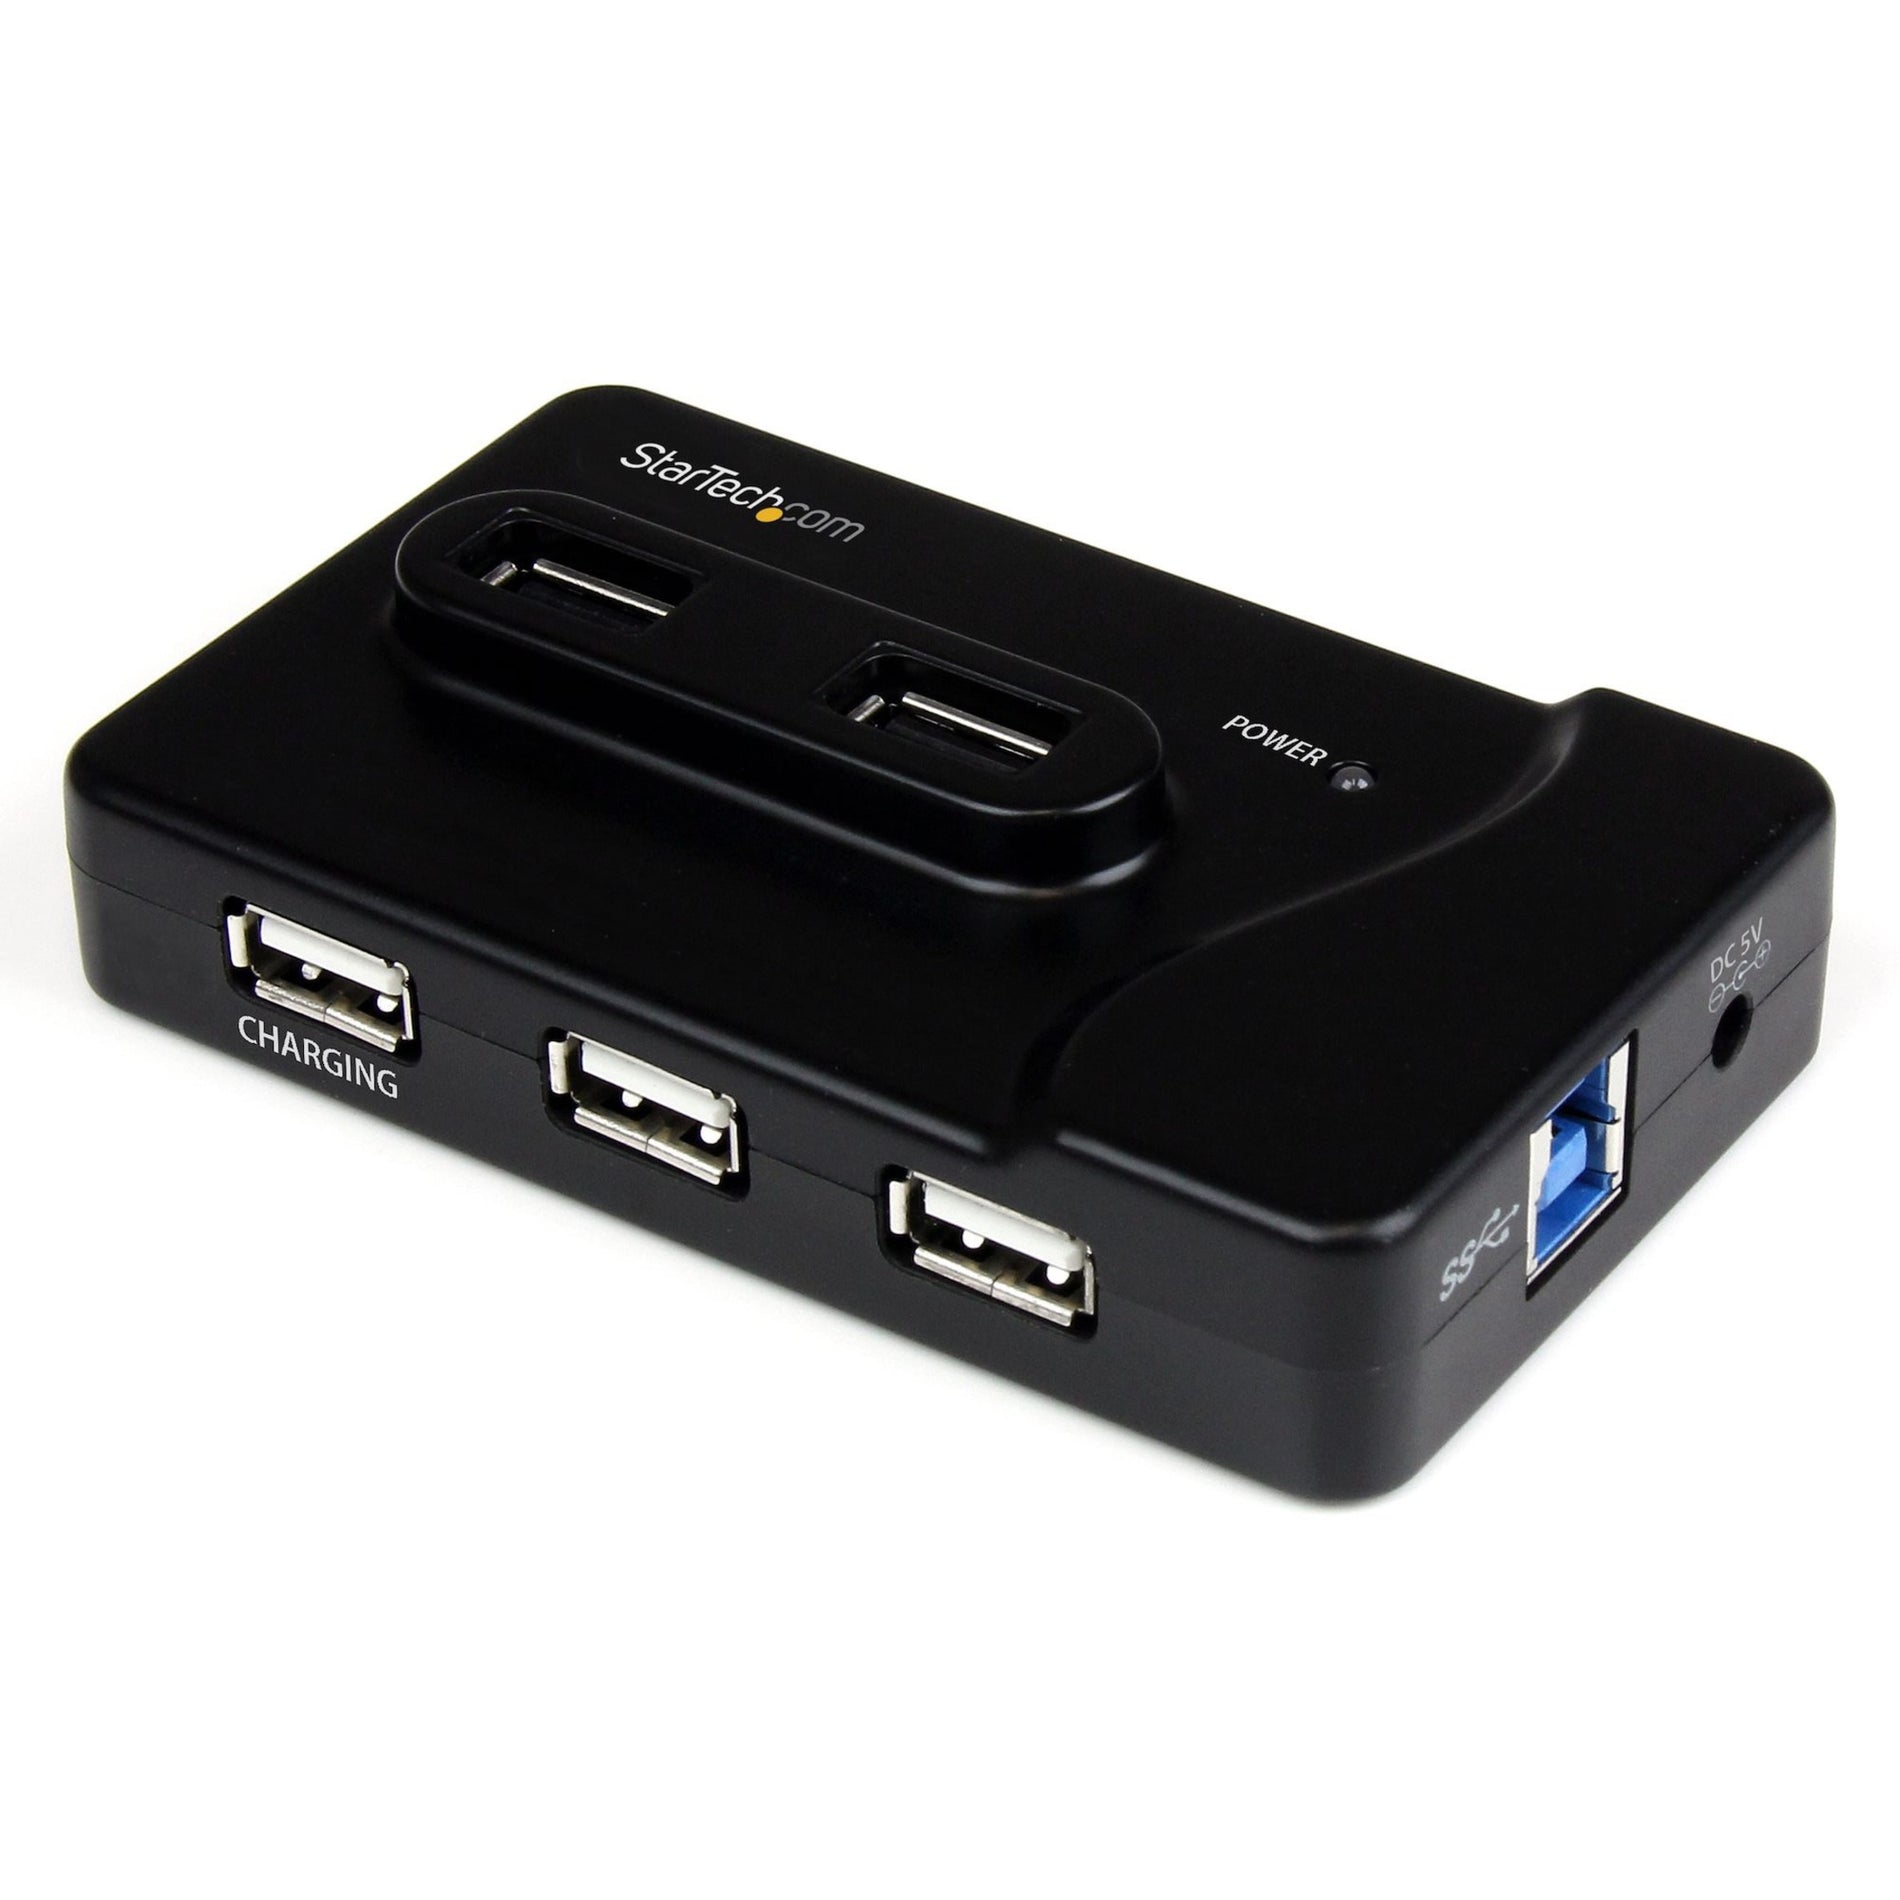 StarTech.com ST7320USBC 6-port USB 3.0/2.0 Combo Hub with Charging Port Expand Your USB Connectivity